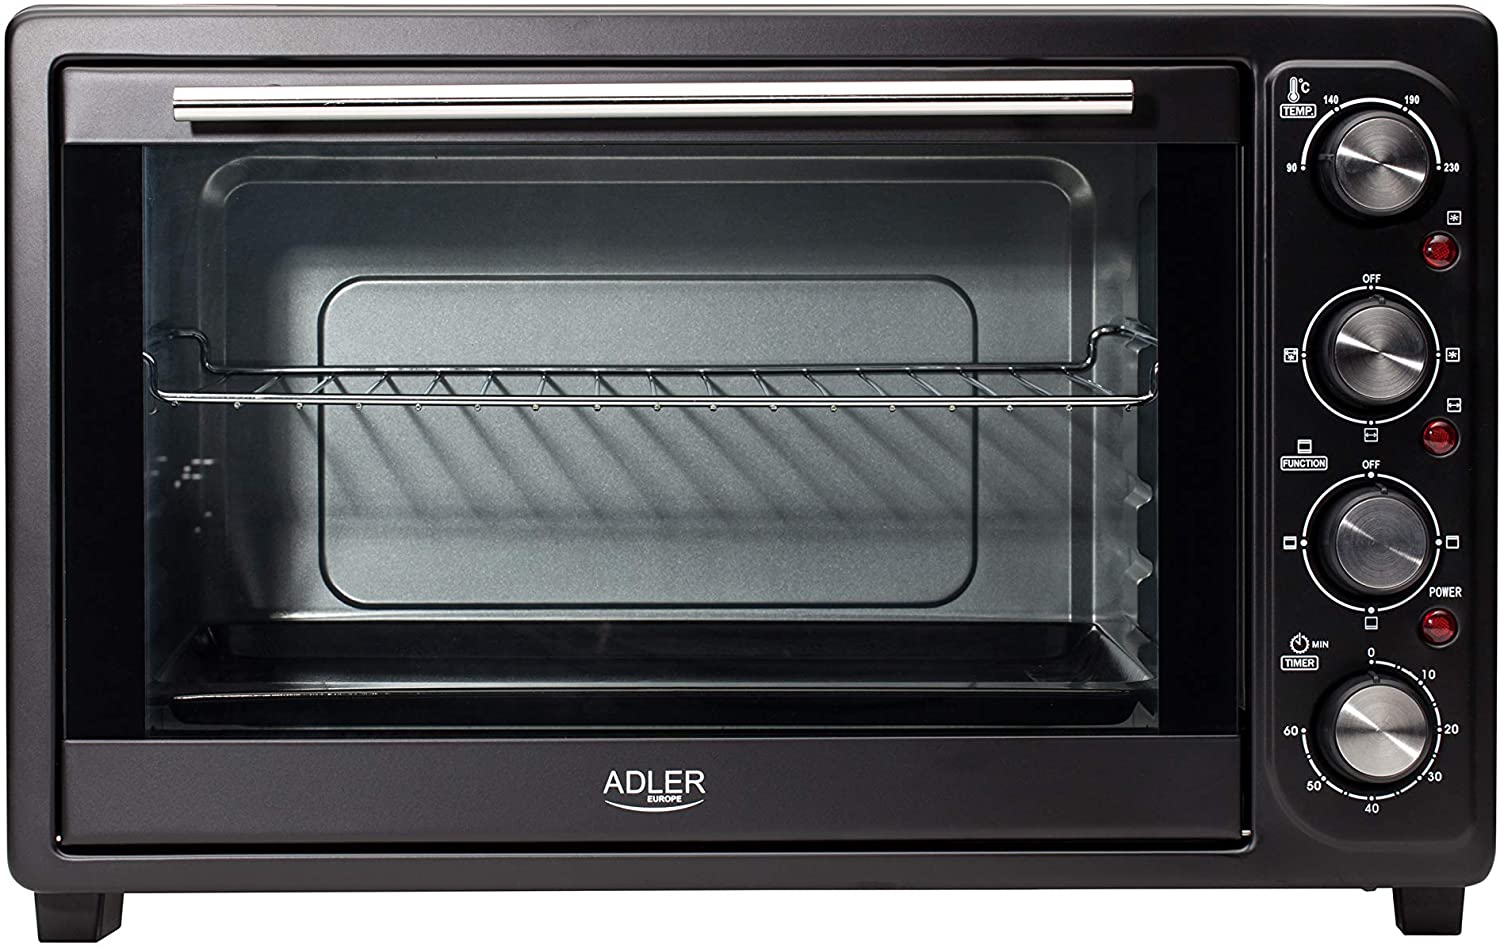 Adler 45 Liter Oven Hot Air Electric rotisserie 45 Liter Convection Oven Grill